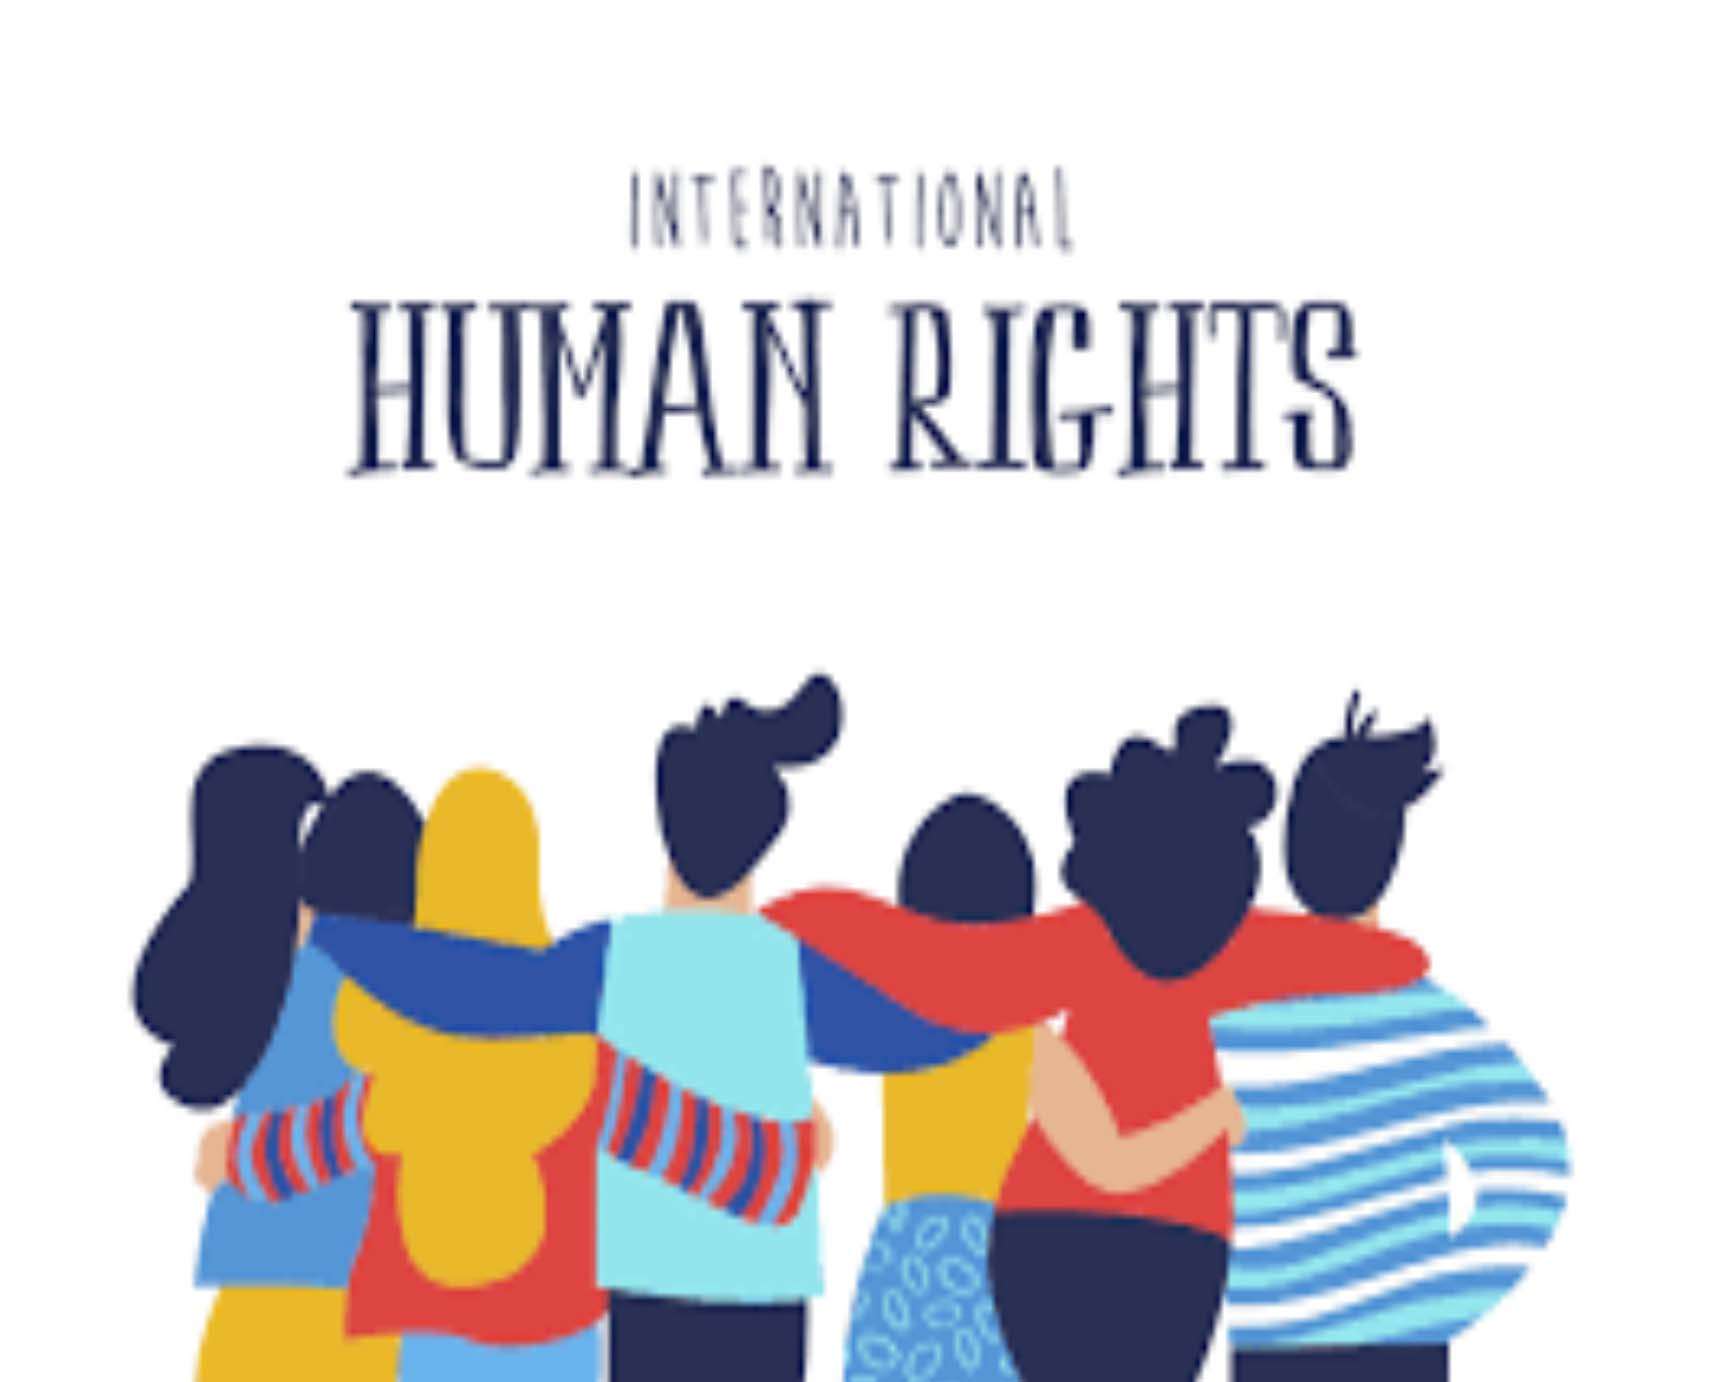 How to Celebrate Human Rights Day in 10 Ways